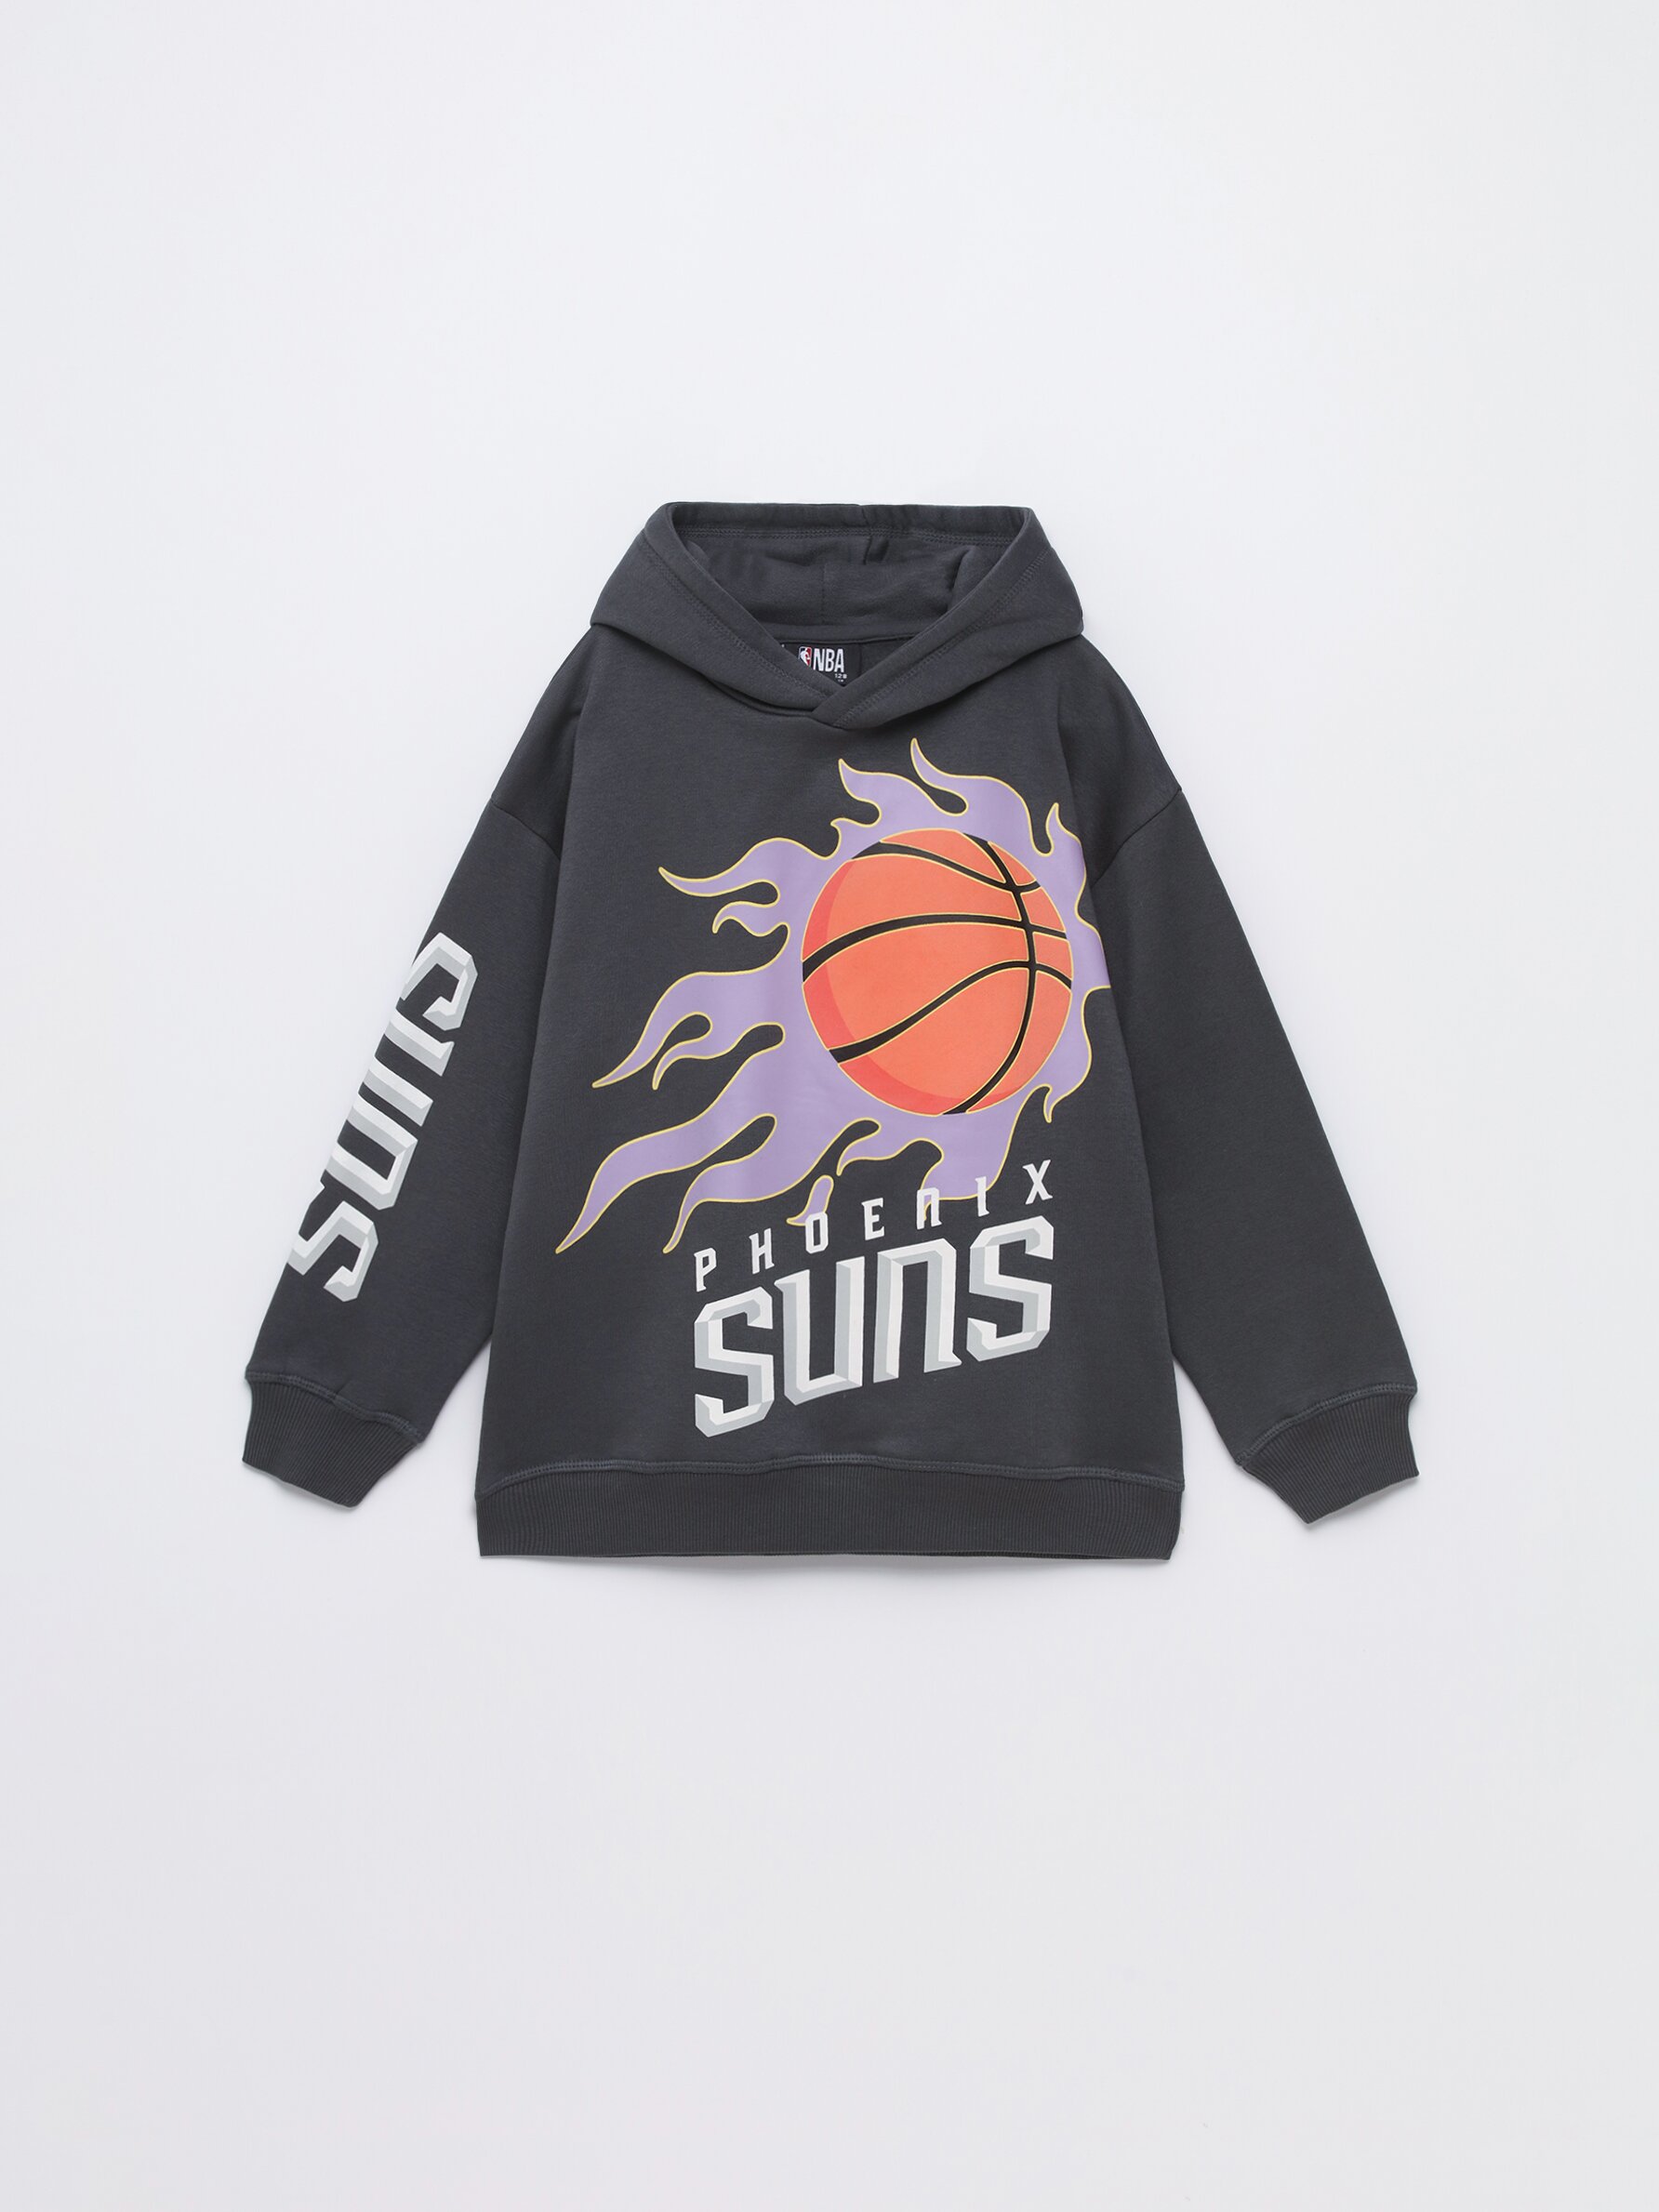 nba store commercial girl suns